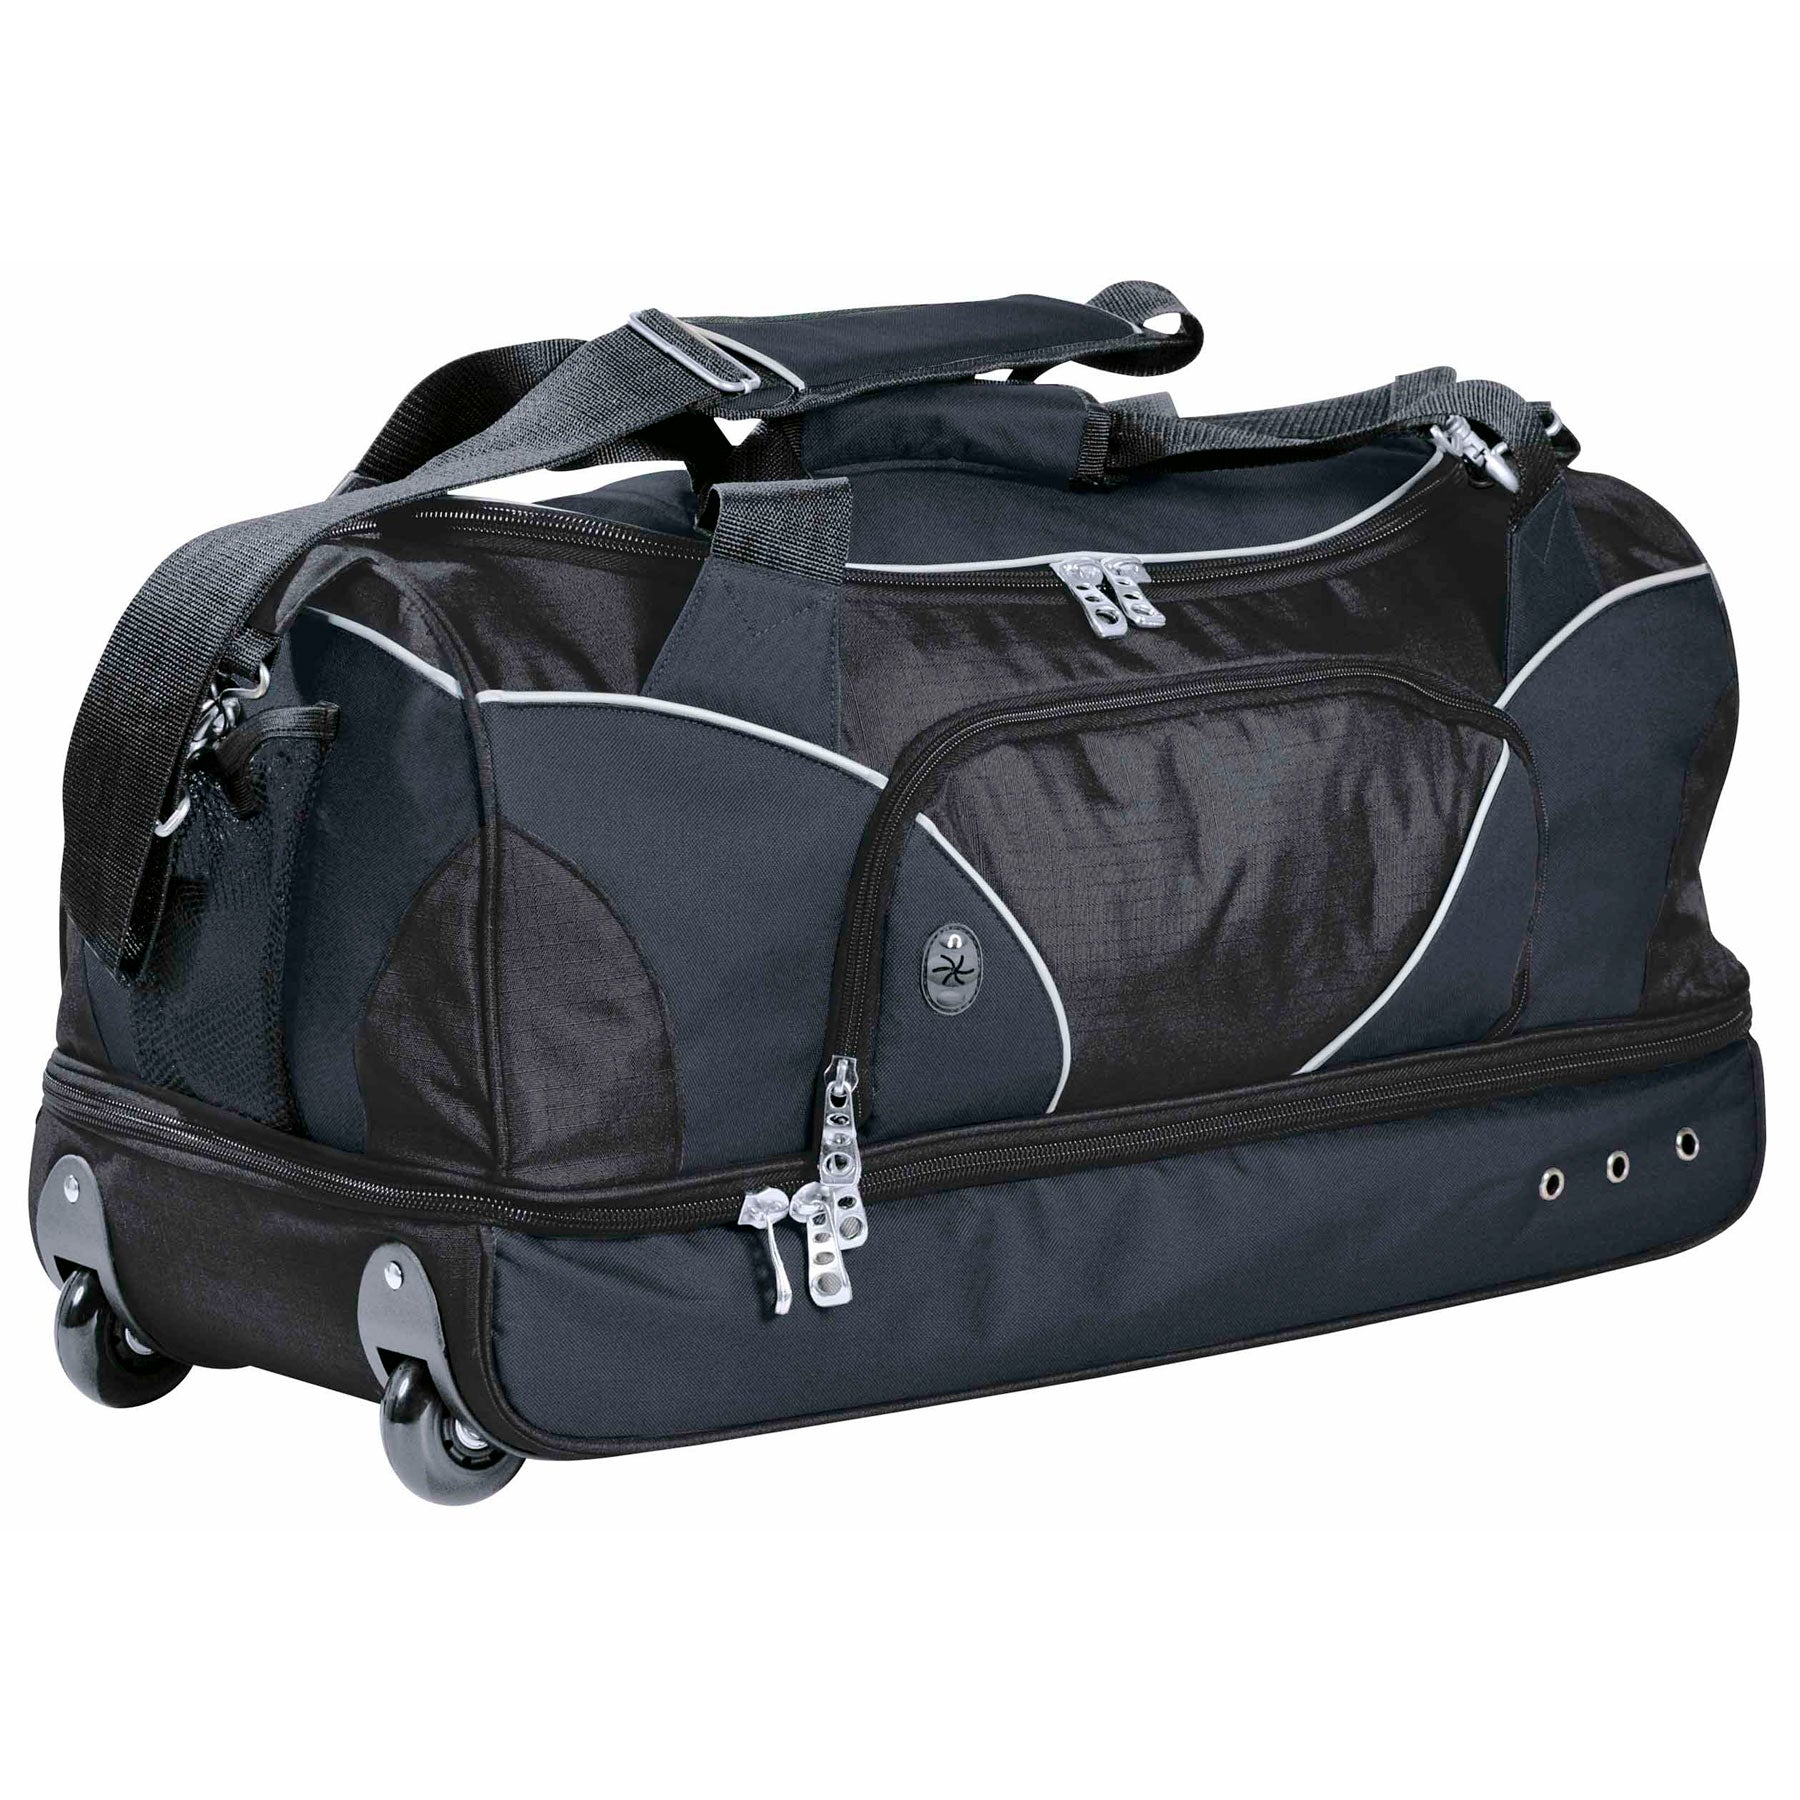 House of Uniforms The Turbulence Travel Bag Gear for Life 